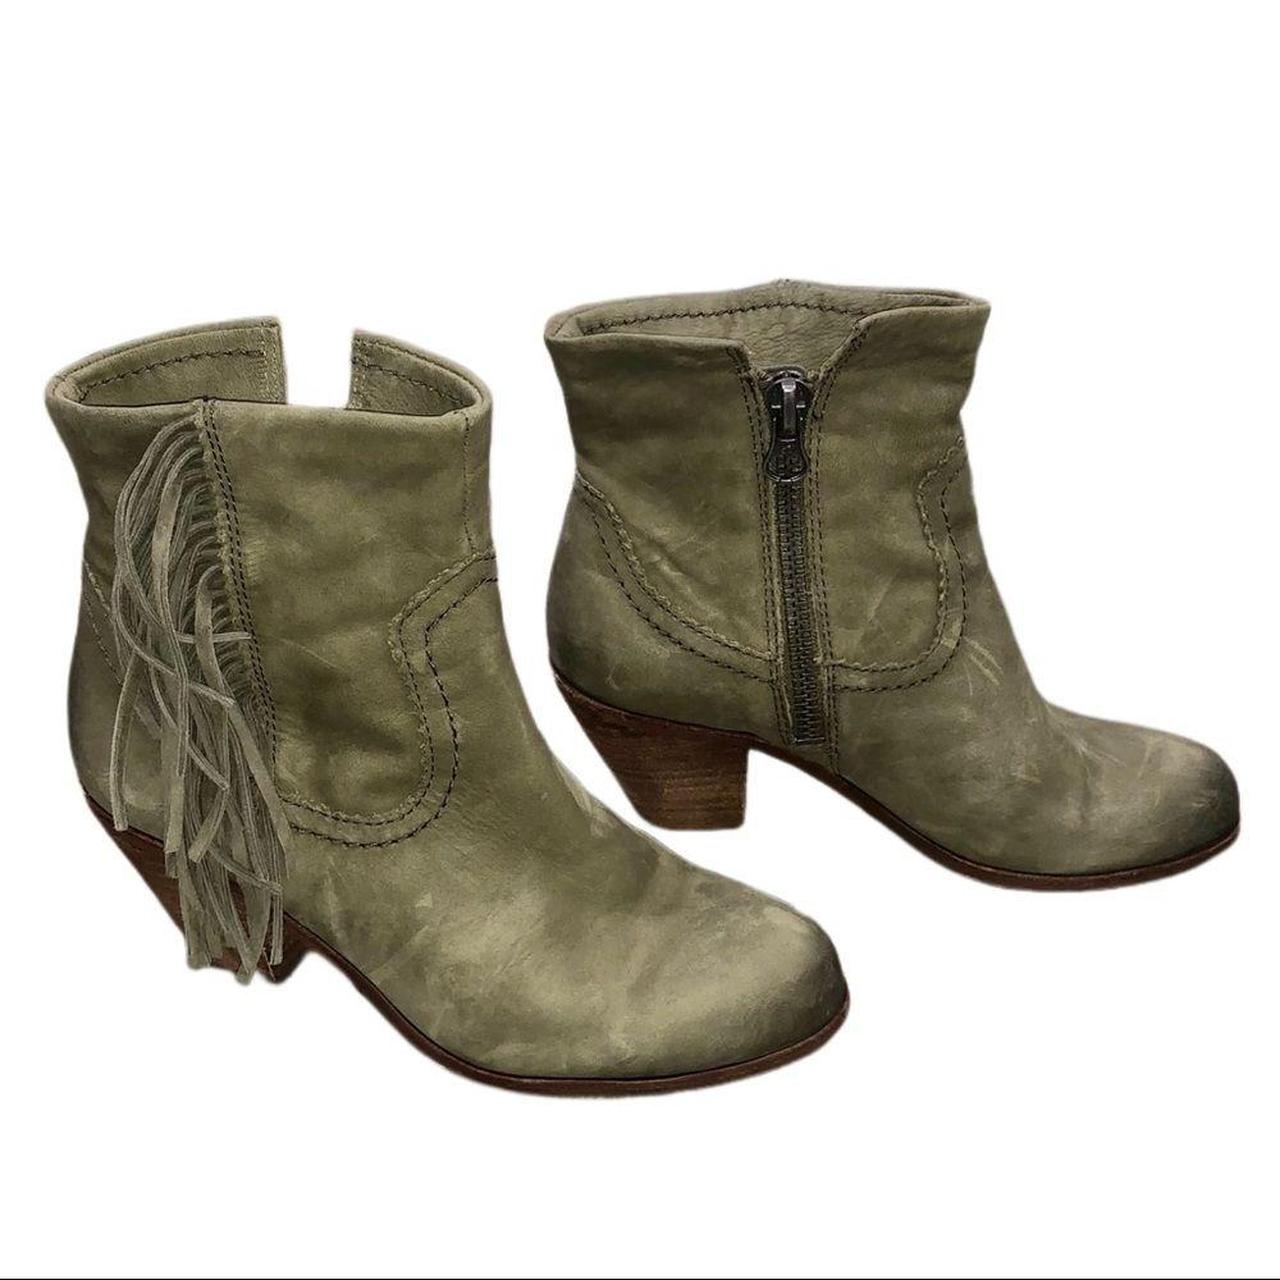 Sam Edelman Women's Green and Brown Boots